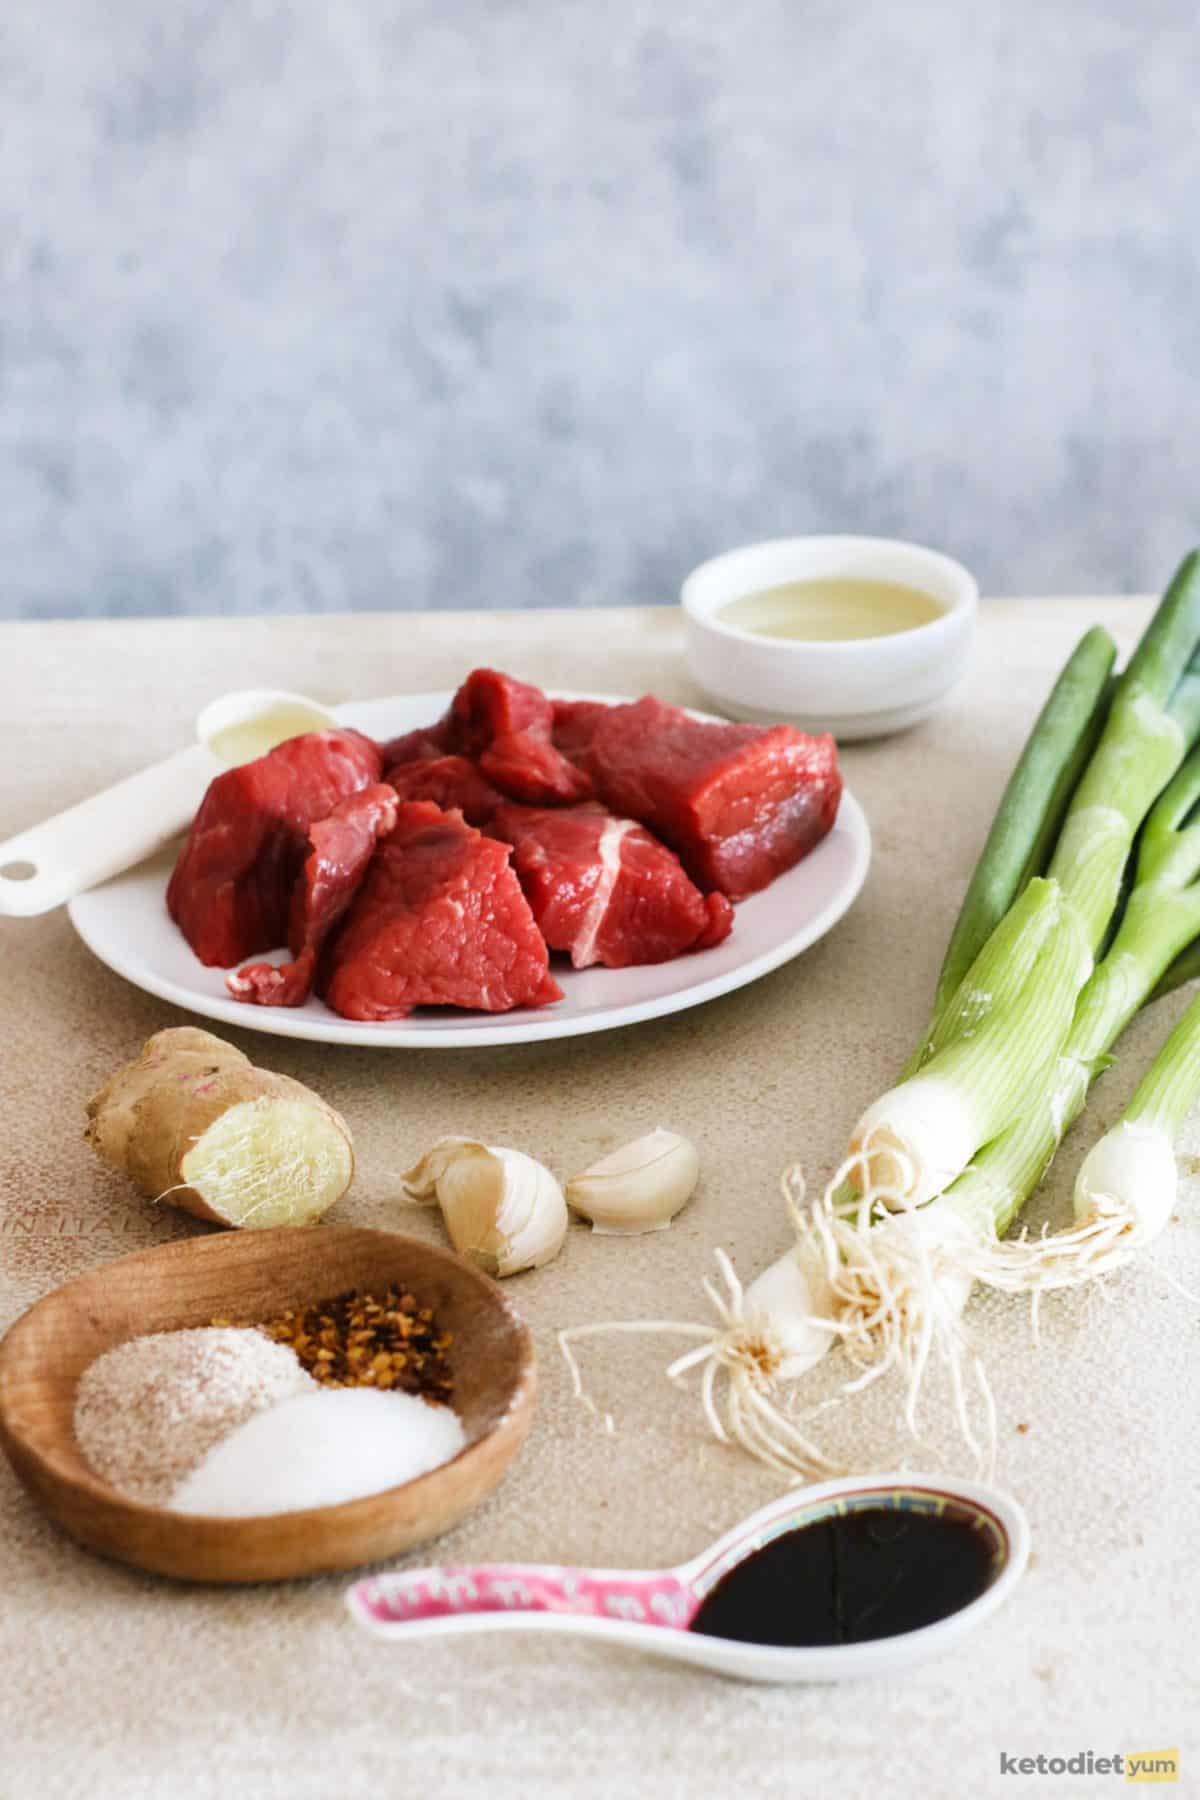 Ingredients arranged on a table to make low carb Mongolian beef